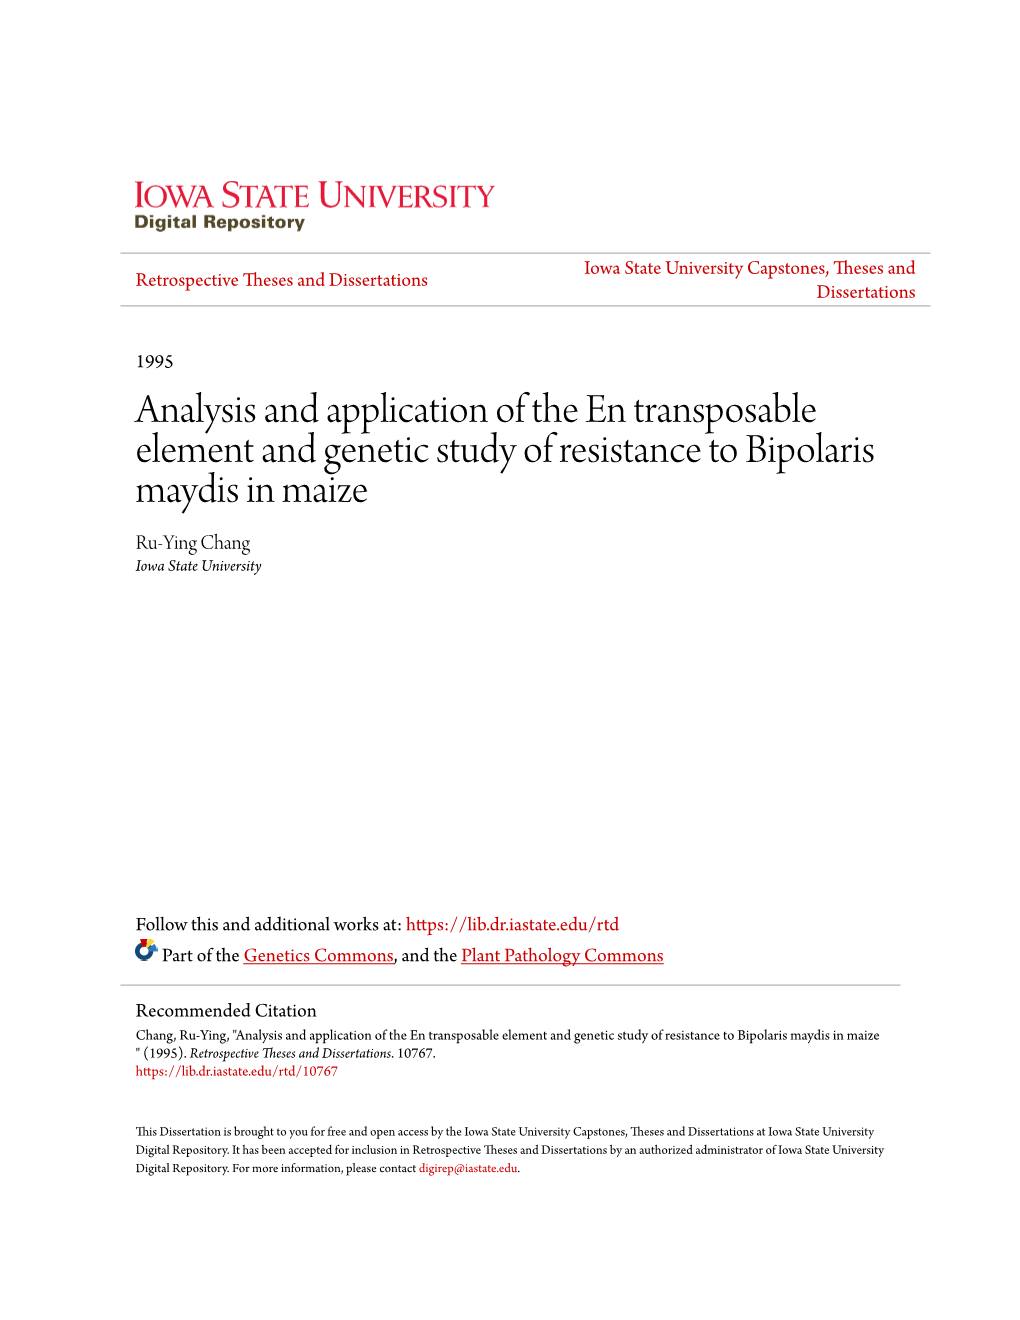 Analysis and Application of the En Transposable Element and Genetic Study of Resistance to Bipolaris Maydis in Maize Ru-Ying Chang Iowa State University